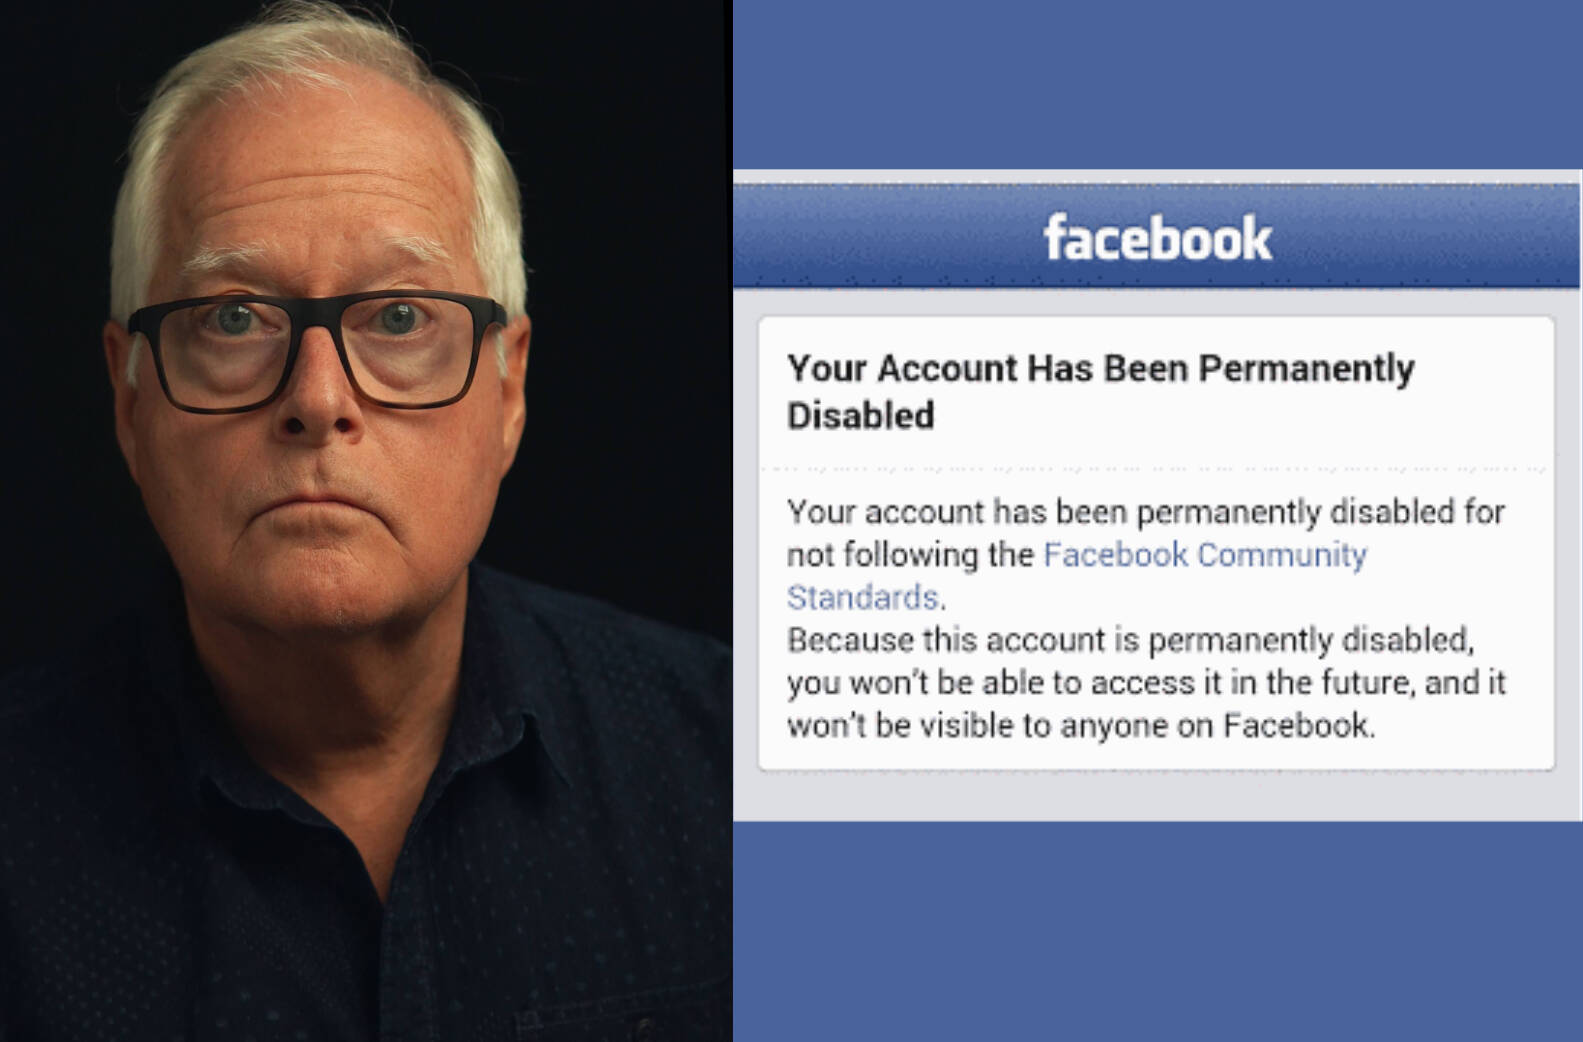 Geoff Edwards lost his Facebook account to a hacker, and has found it impossible to get it back.